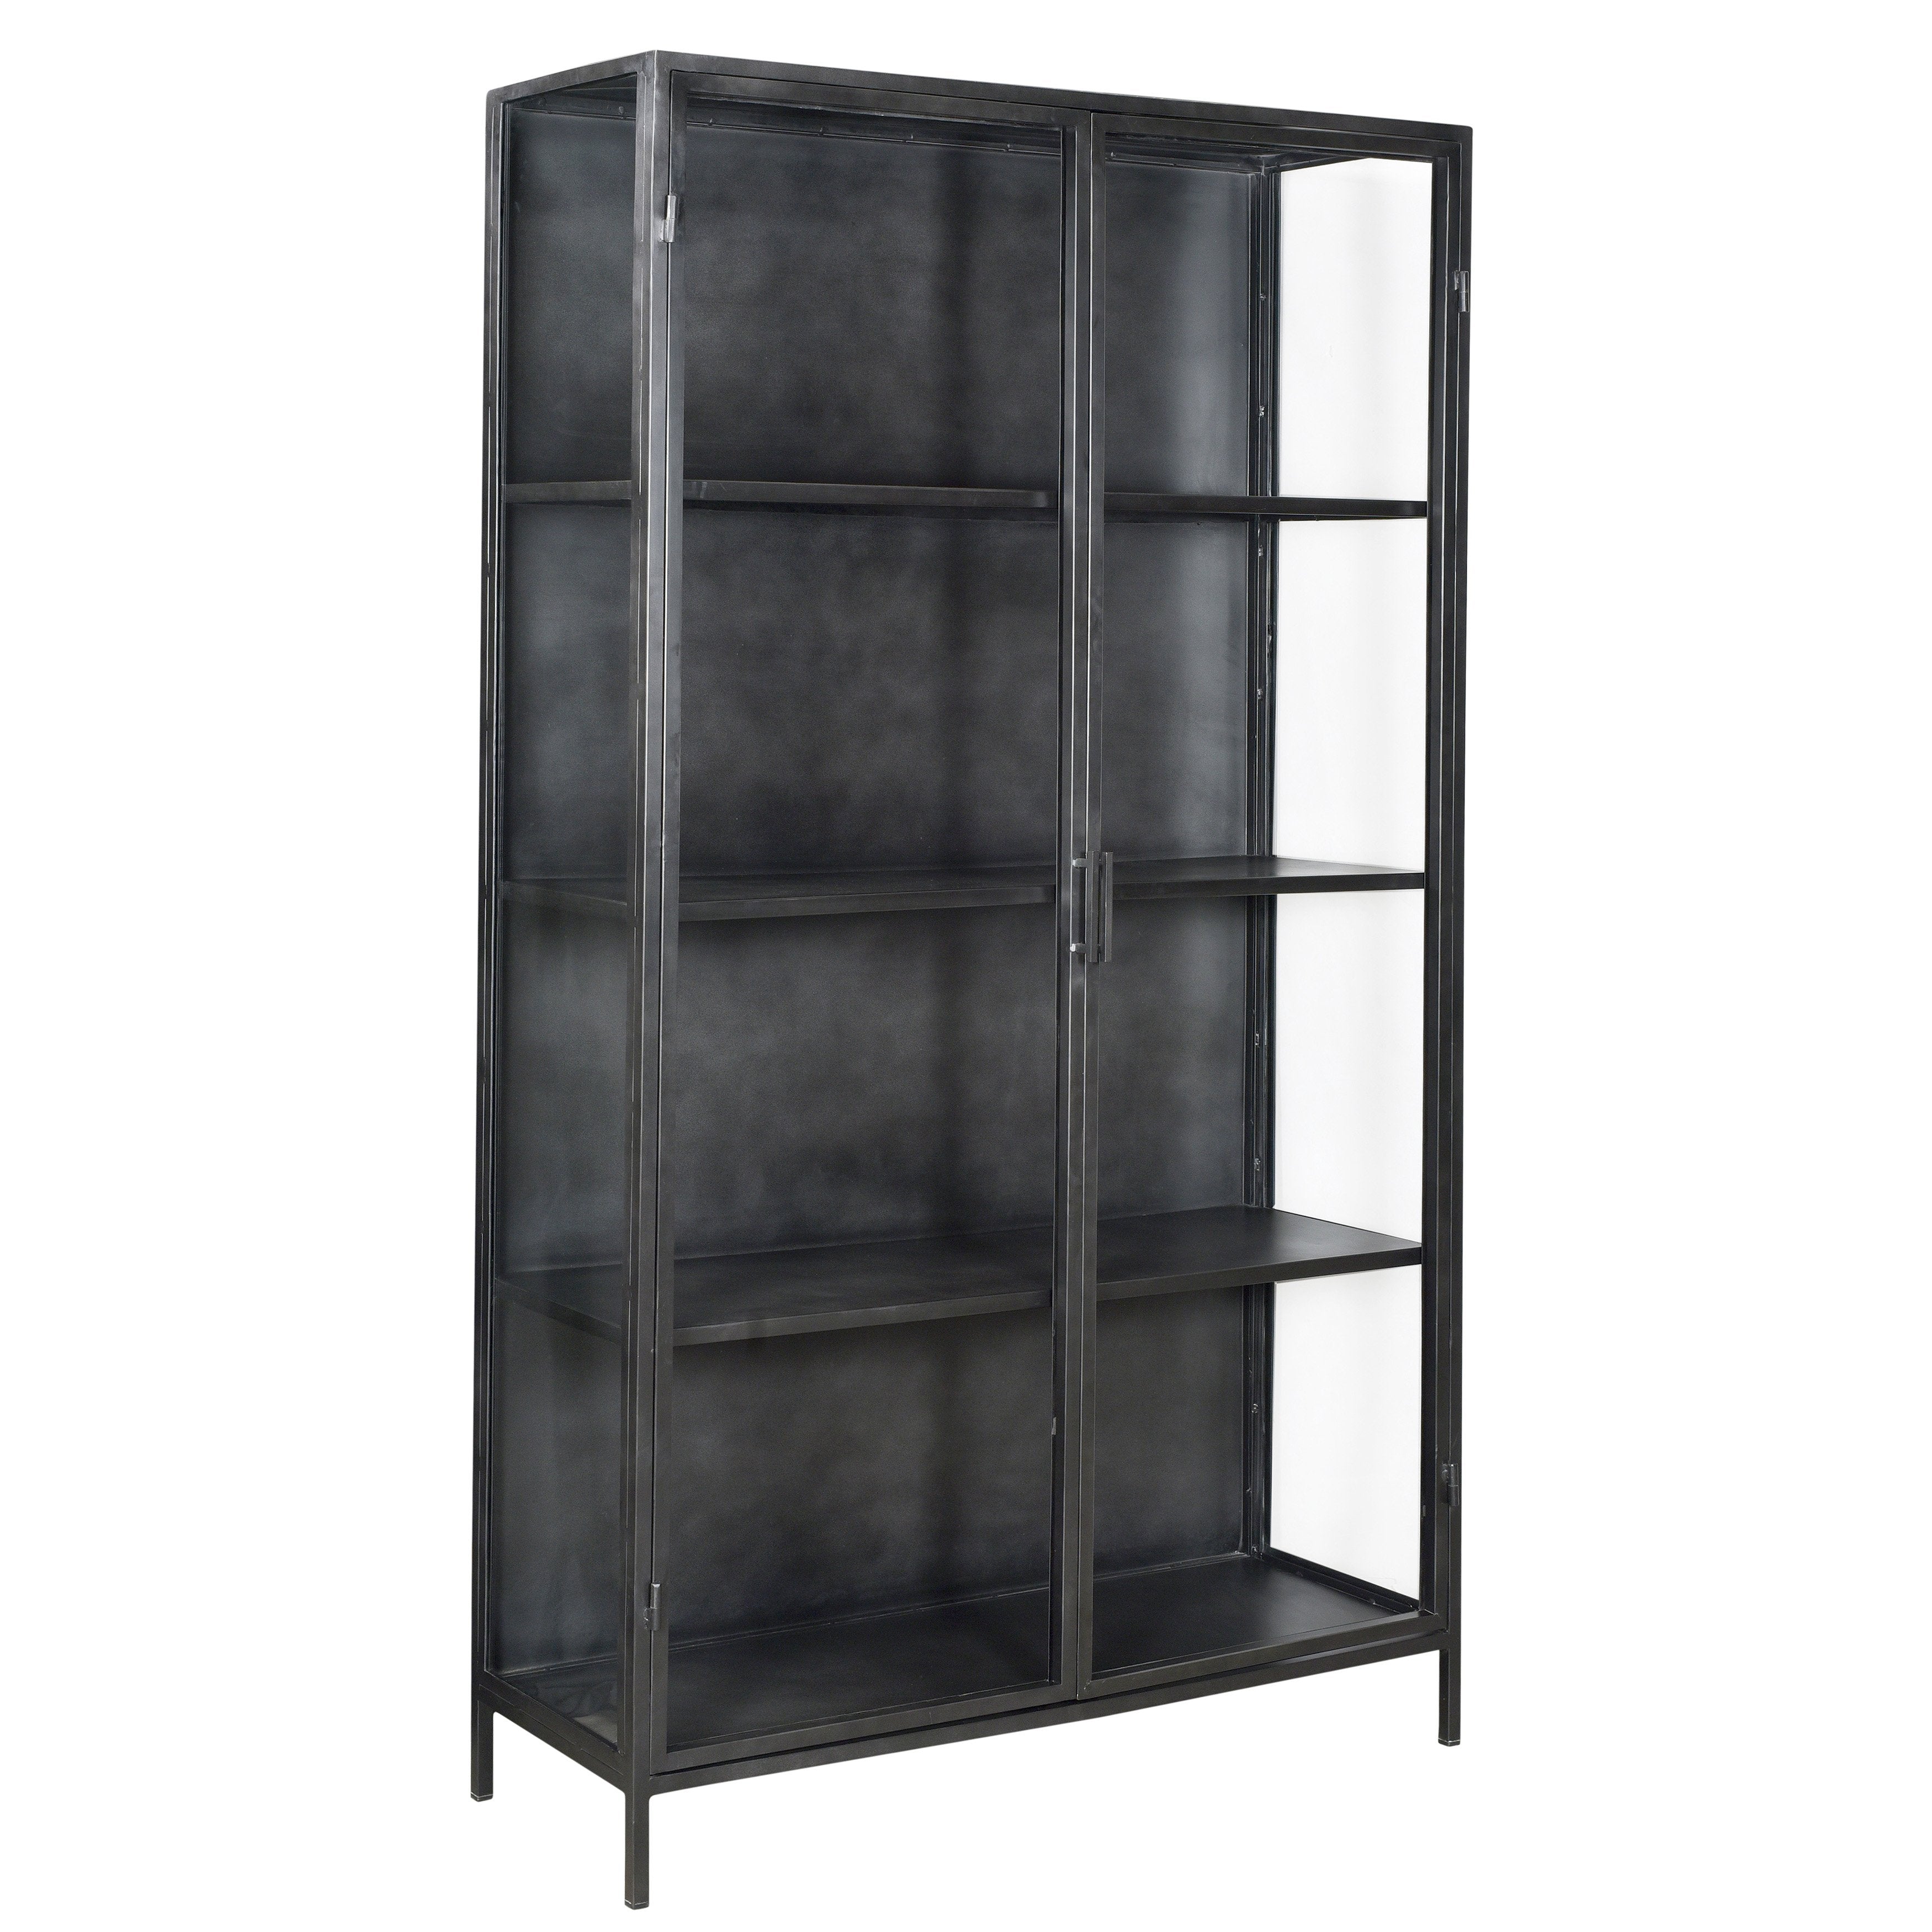 With a touch of vintage industrial style and personality, this 78” tall cabinet will add flair to your home. Designed on a brushed gunmetal, iron frame with glass doors and side panels that give view to four shelf spaces. Amethyst Home provides interior design, new home construction design consulting, vintage area rugs, and lighting in the Winter Garden metro area.